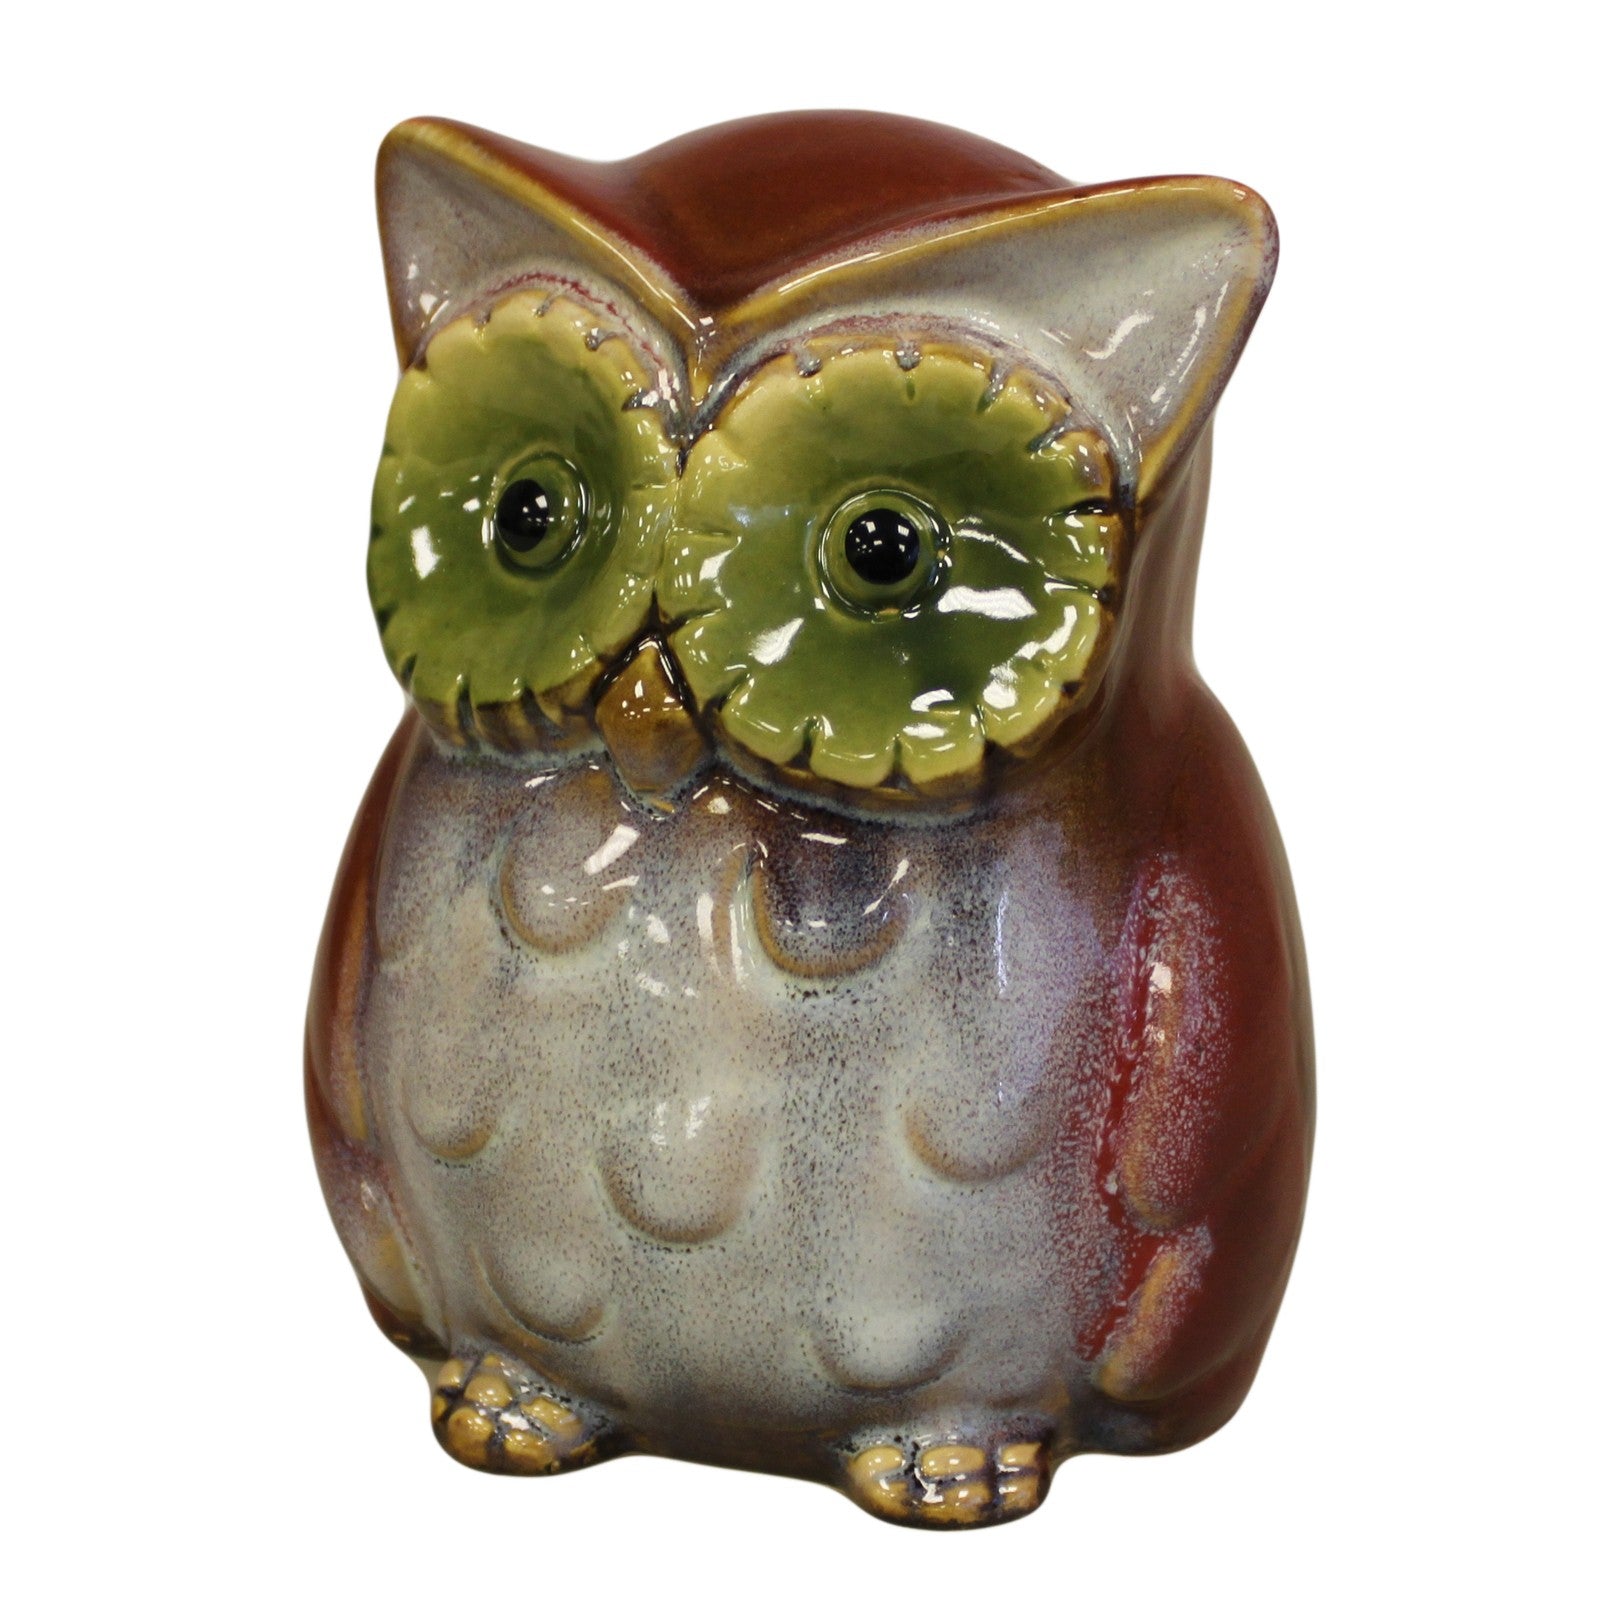 View Ceramic Owl Bank Red information